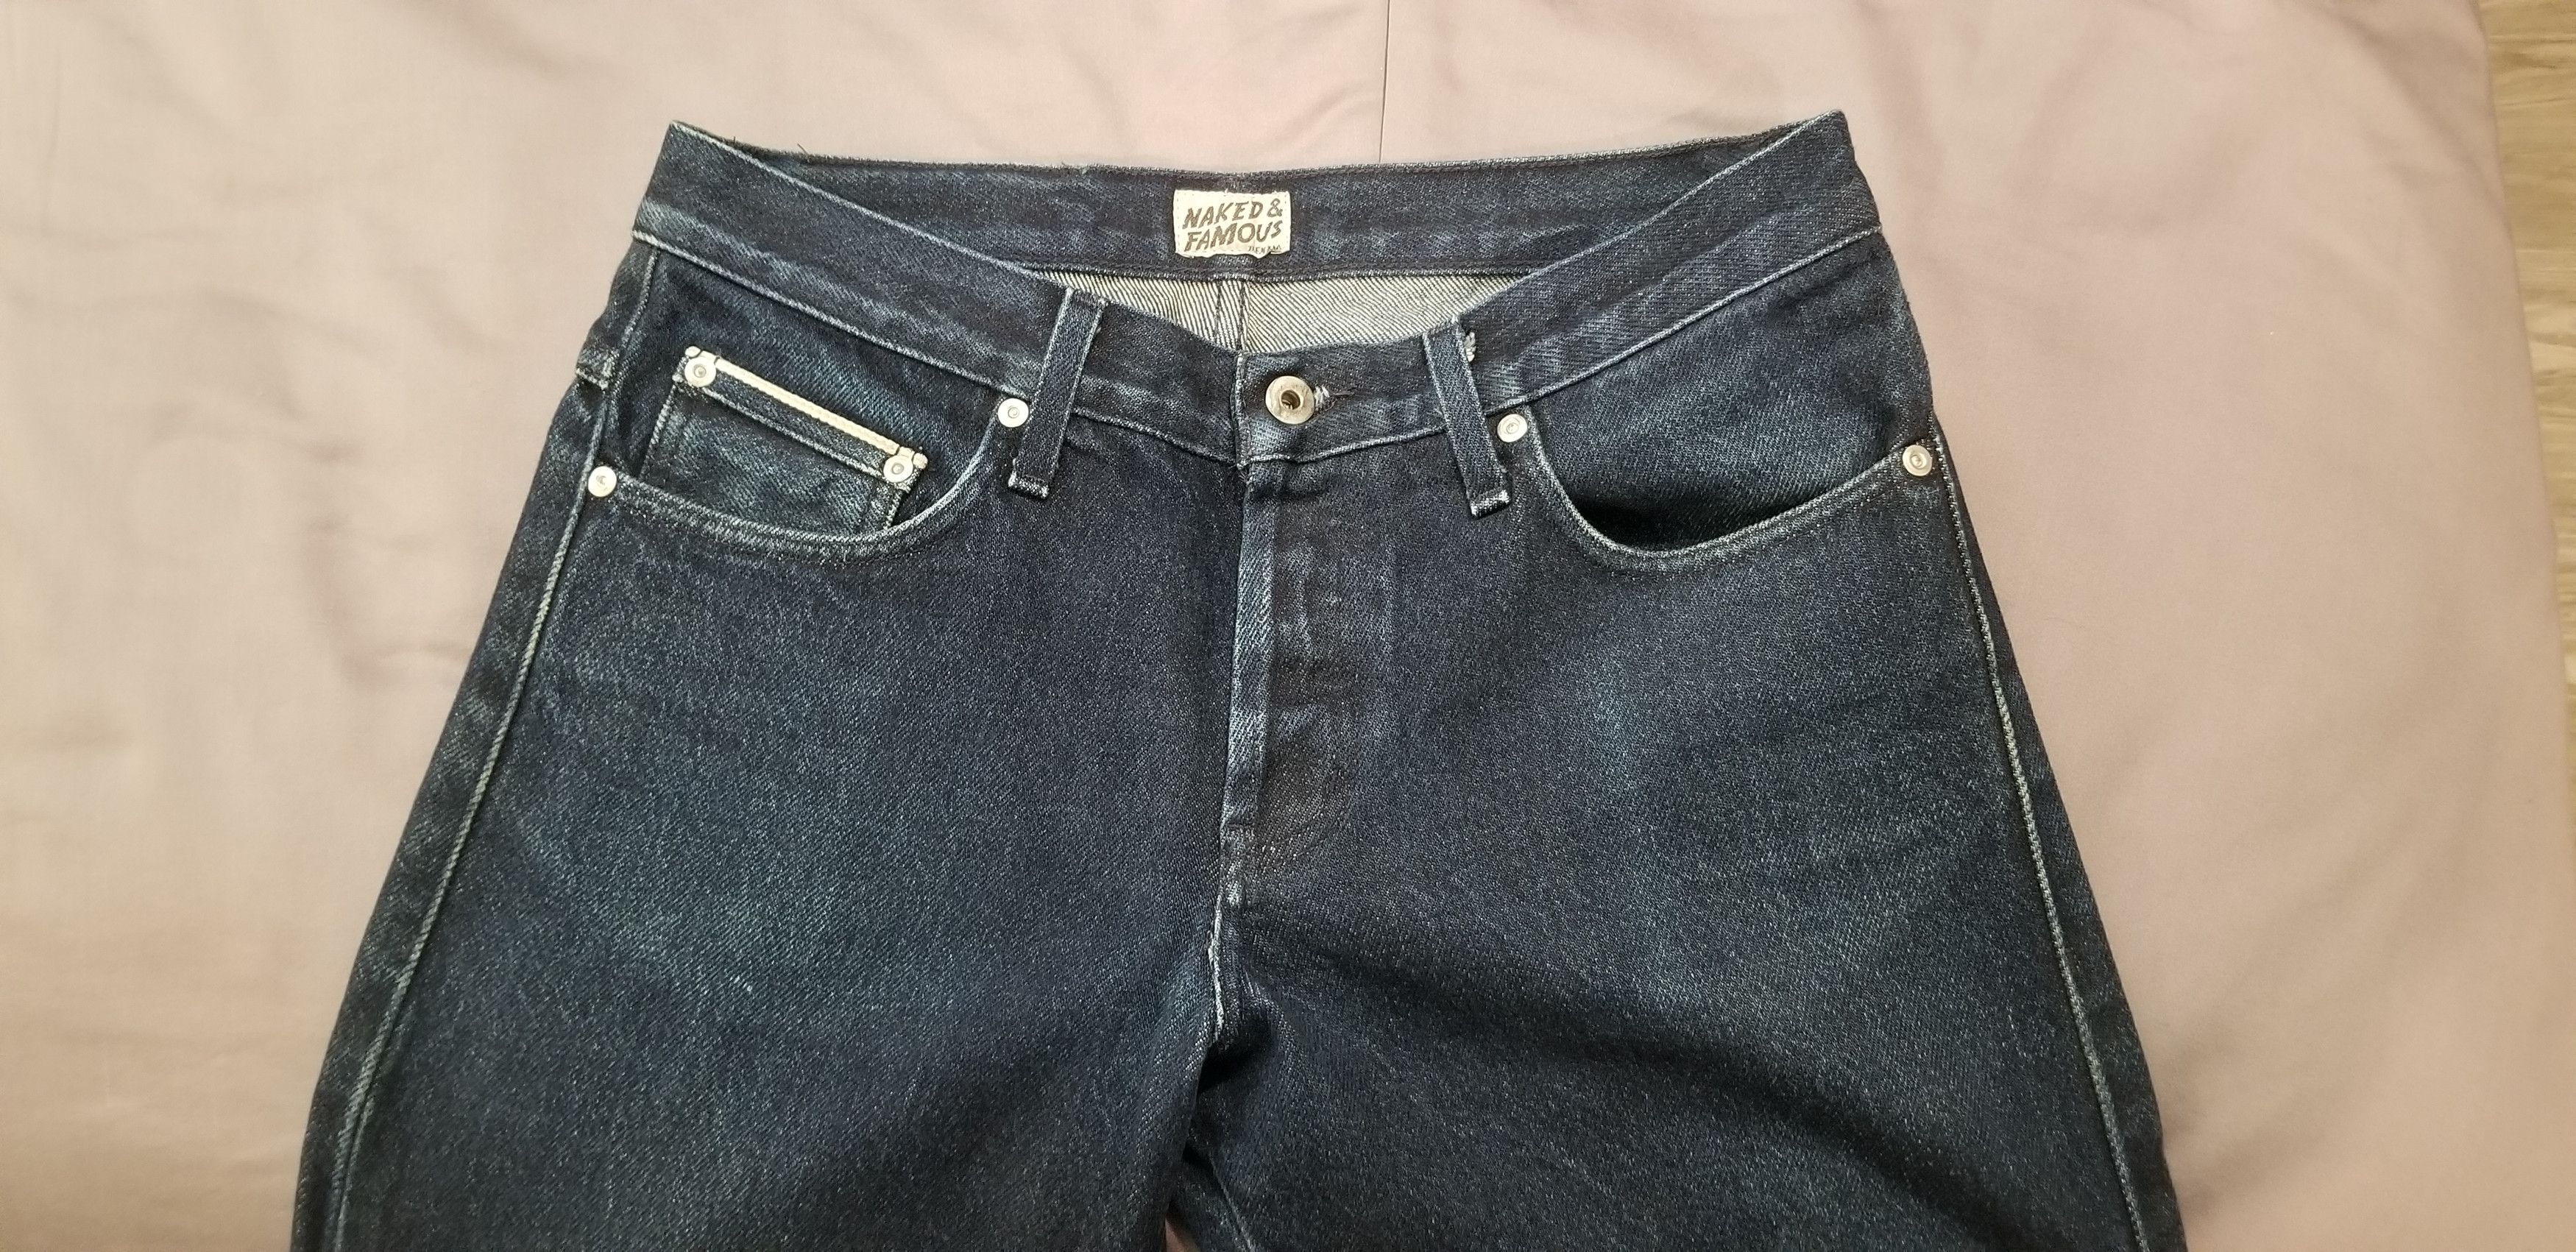 Naked & Famous SlimGuy Naked And Famous Denim | Grailed